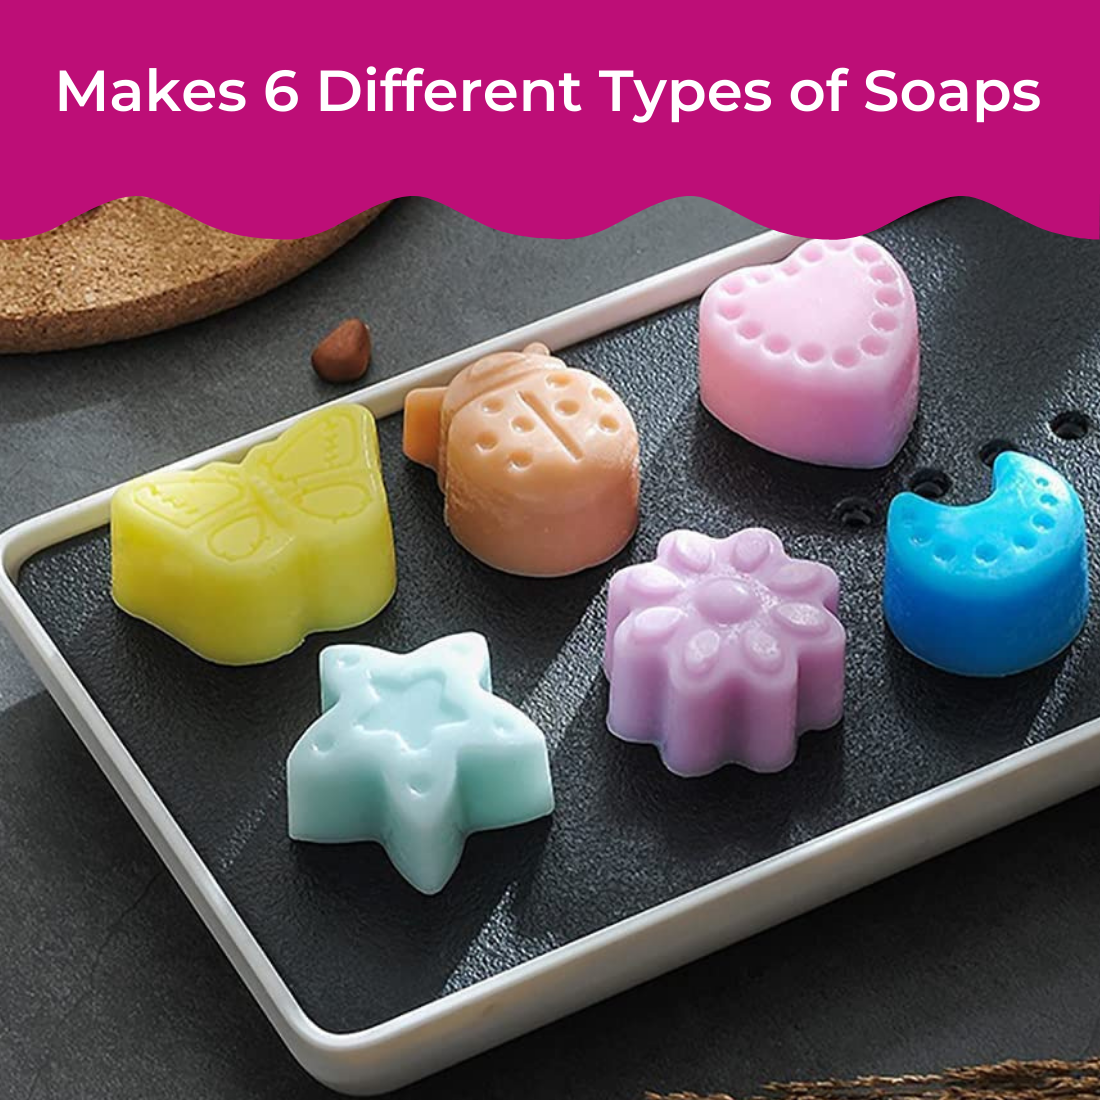 Oytra Soap Making Kit | 7 Mould Shapes | Science Experiment & Girls, Safe & Non - Toxic Kit for Birthday Gifts | Toy DIY Fun ToysKit for Boys